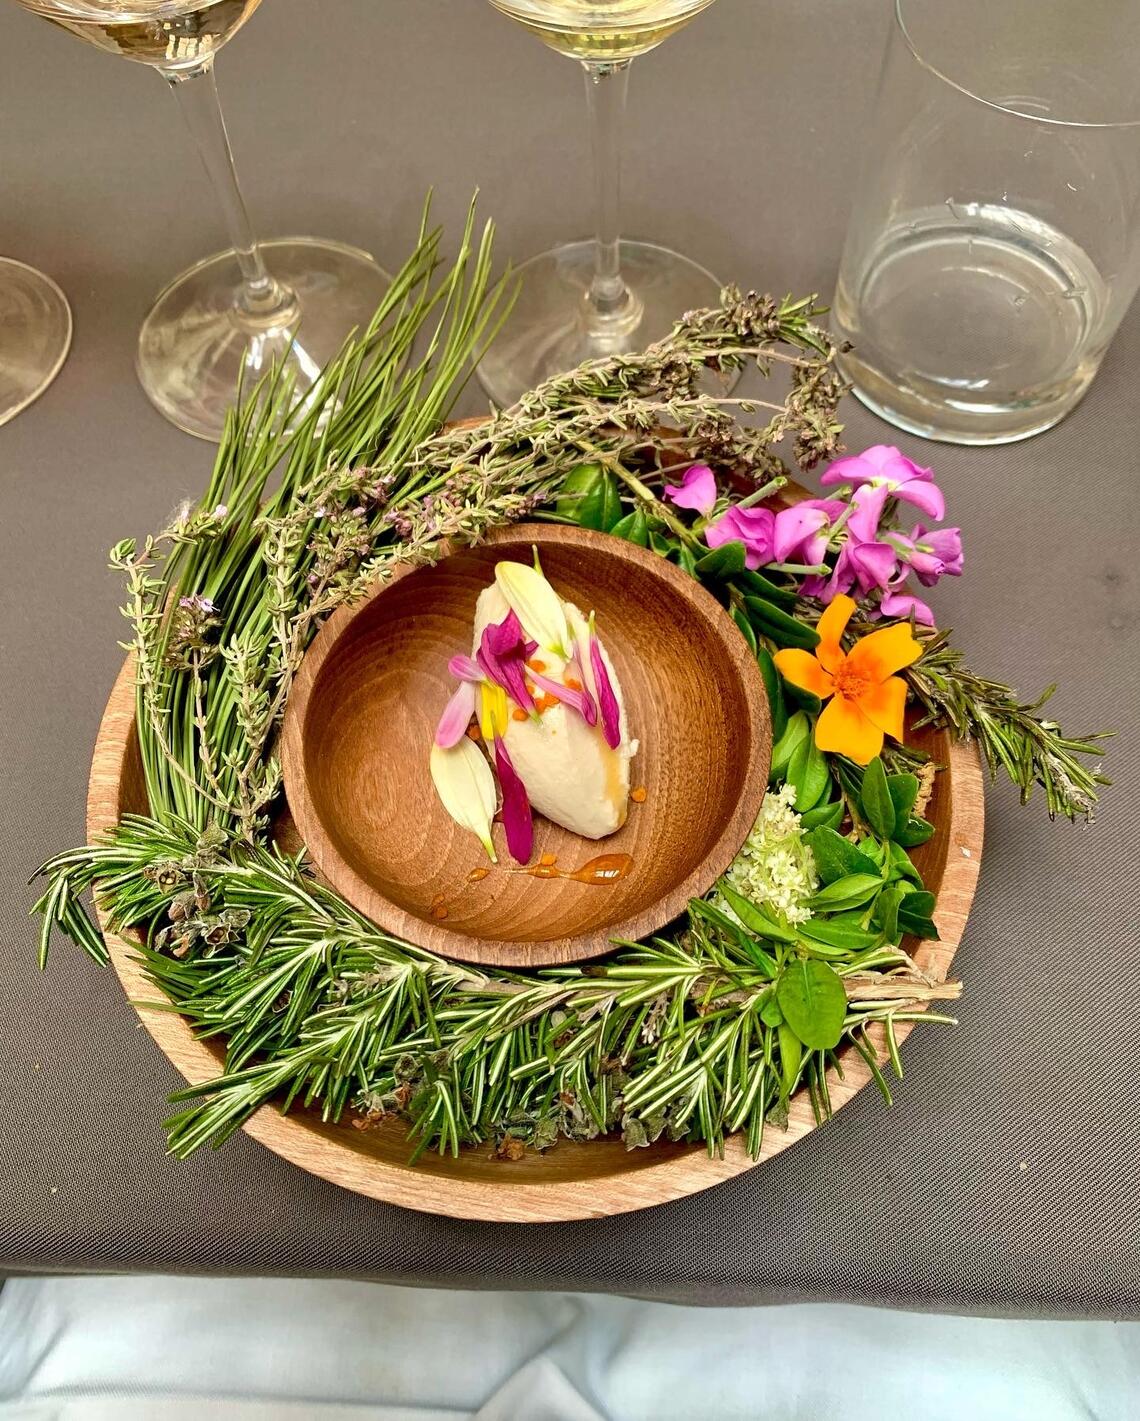 A closeup of a beautiful plate of food styled with flowers and herbs around the edges and a small plate in the centre.